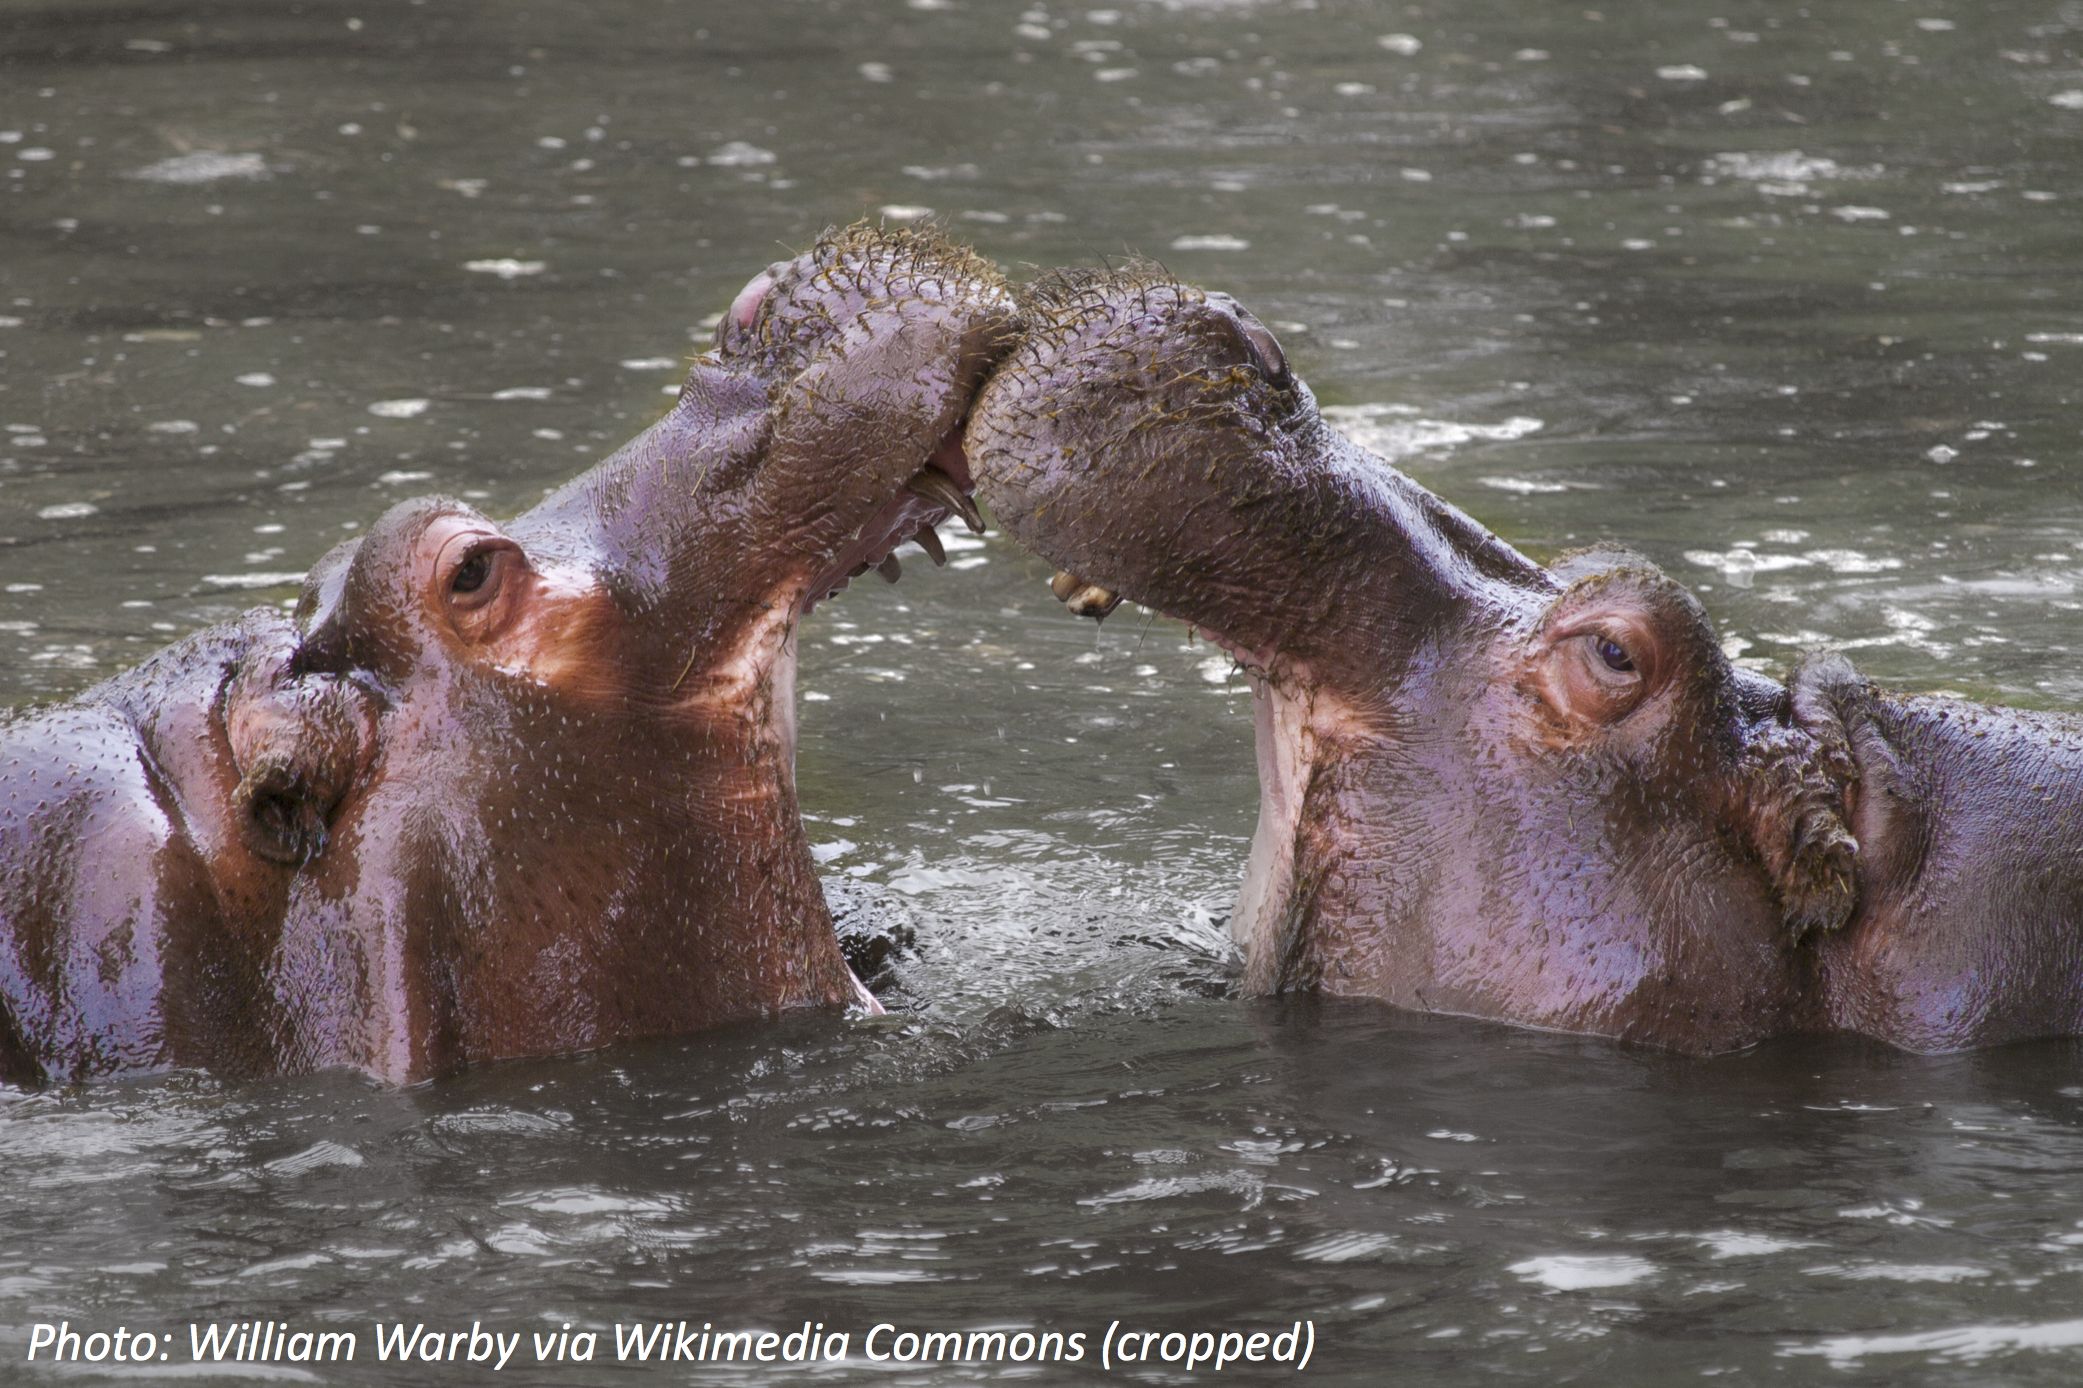 Kissing a Hippo